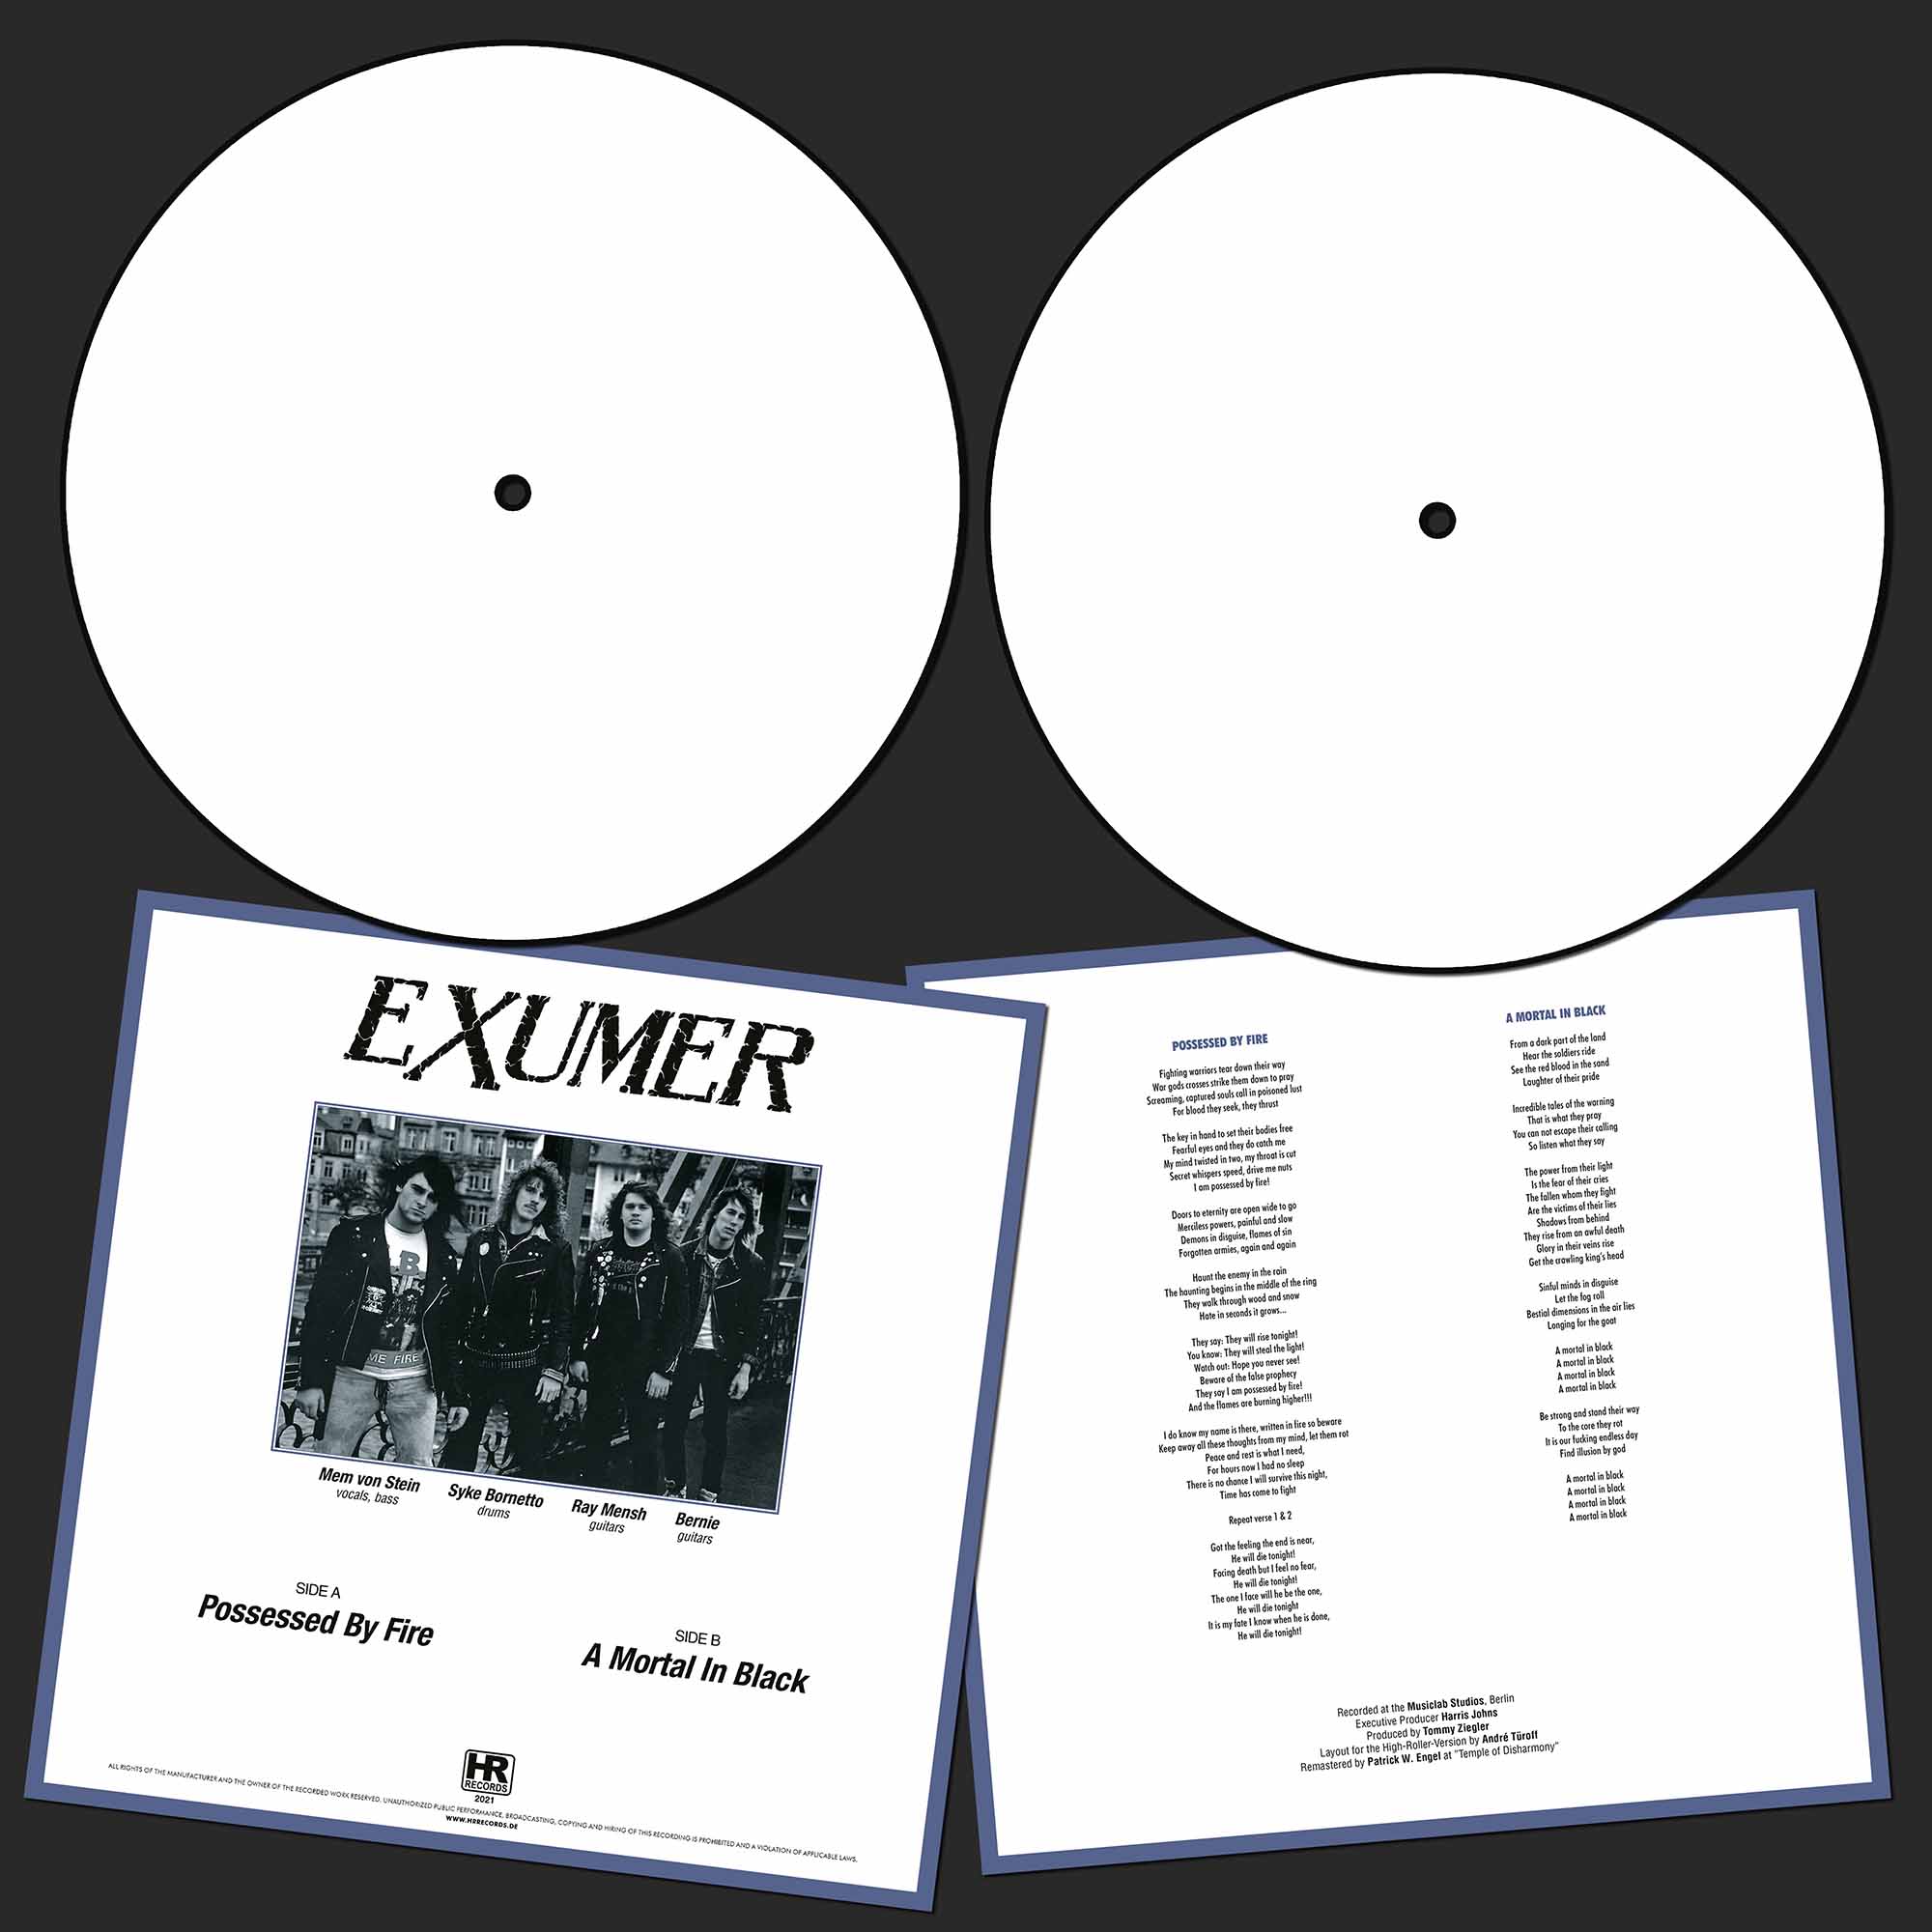 EXUMER - Possessed by Fire/ A Mortal in Black  PICTURE SHAPE